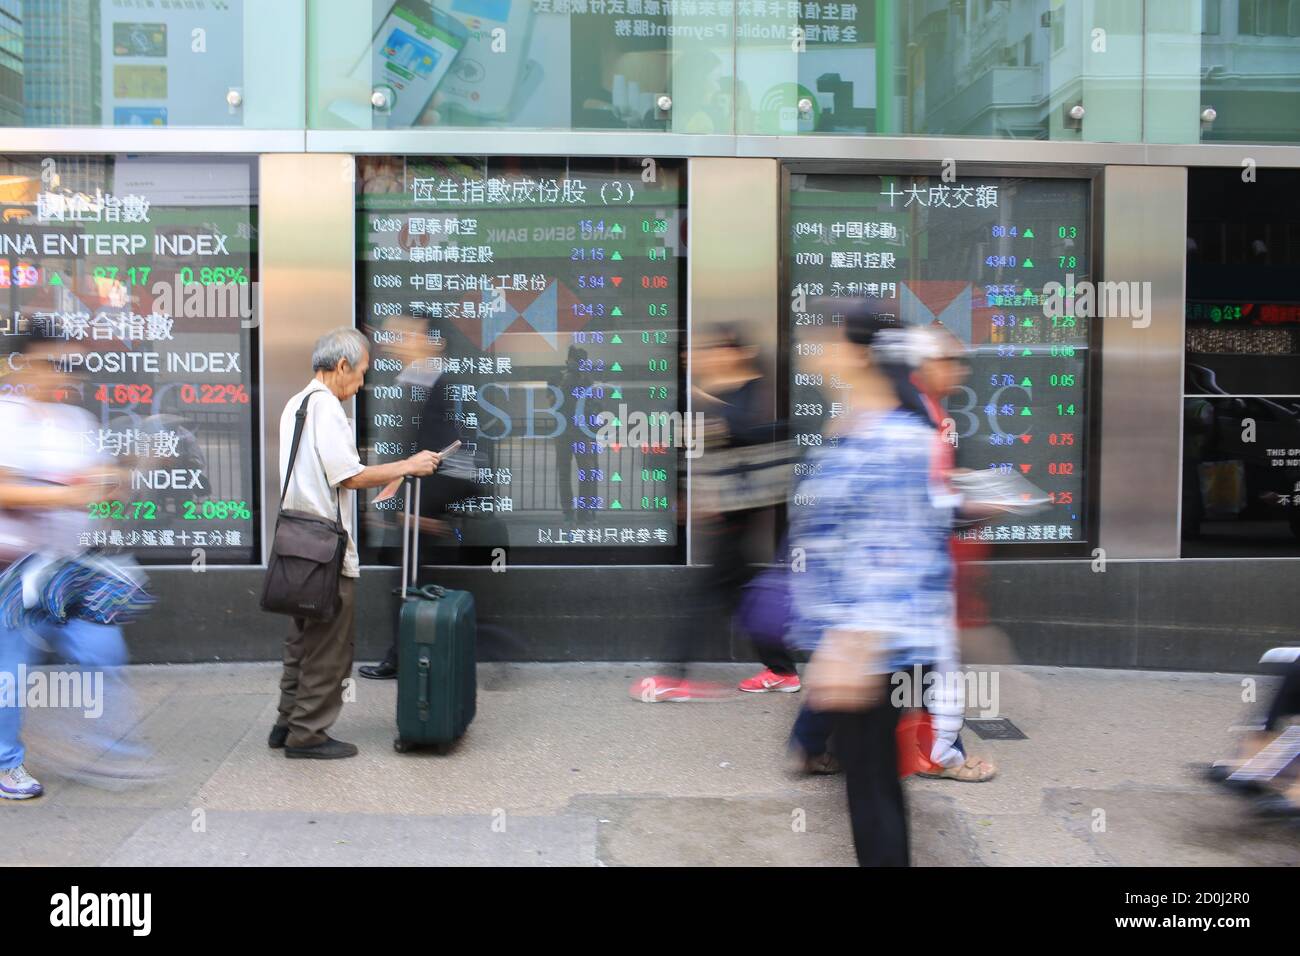 HSBC banking on the hong kong street, old stockholder watch the trading board Stock Photo